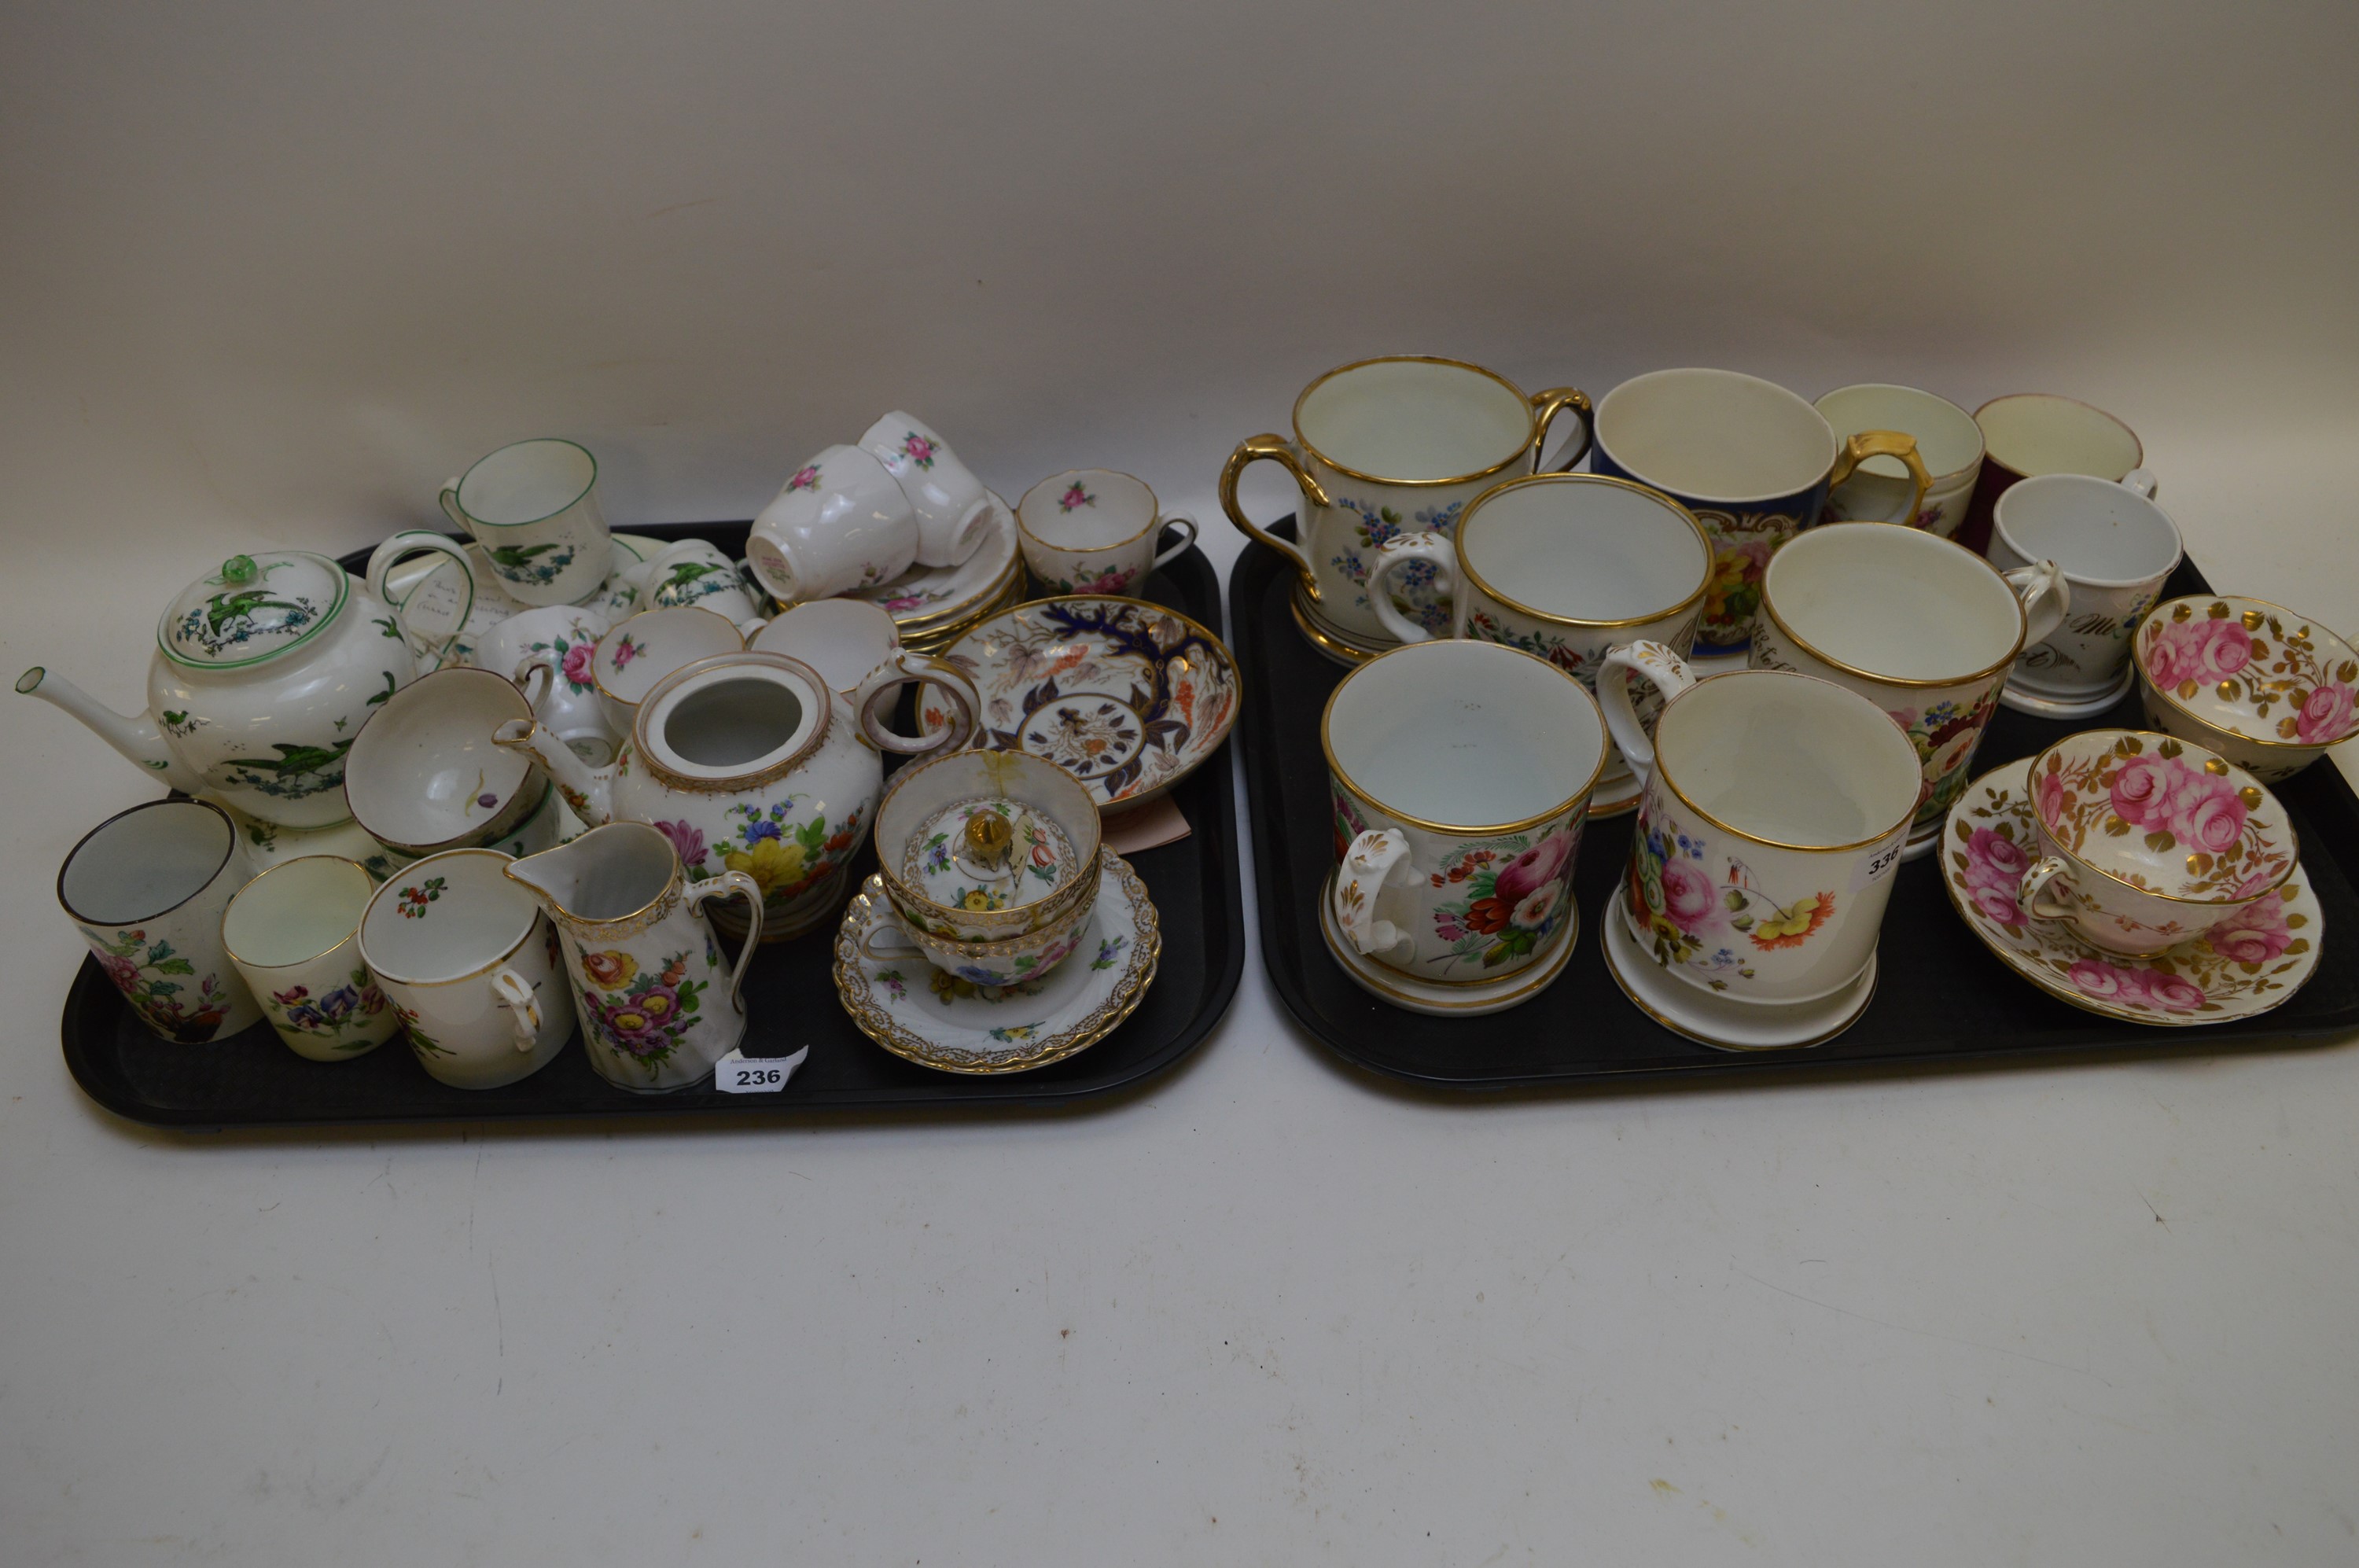 A collection of 19th Century ceramic mugs and other ceramic tea/coffee items.